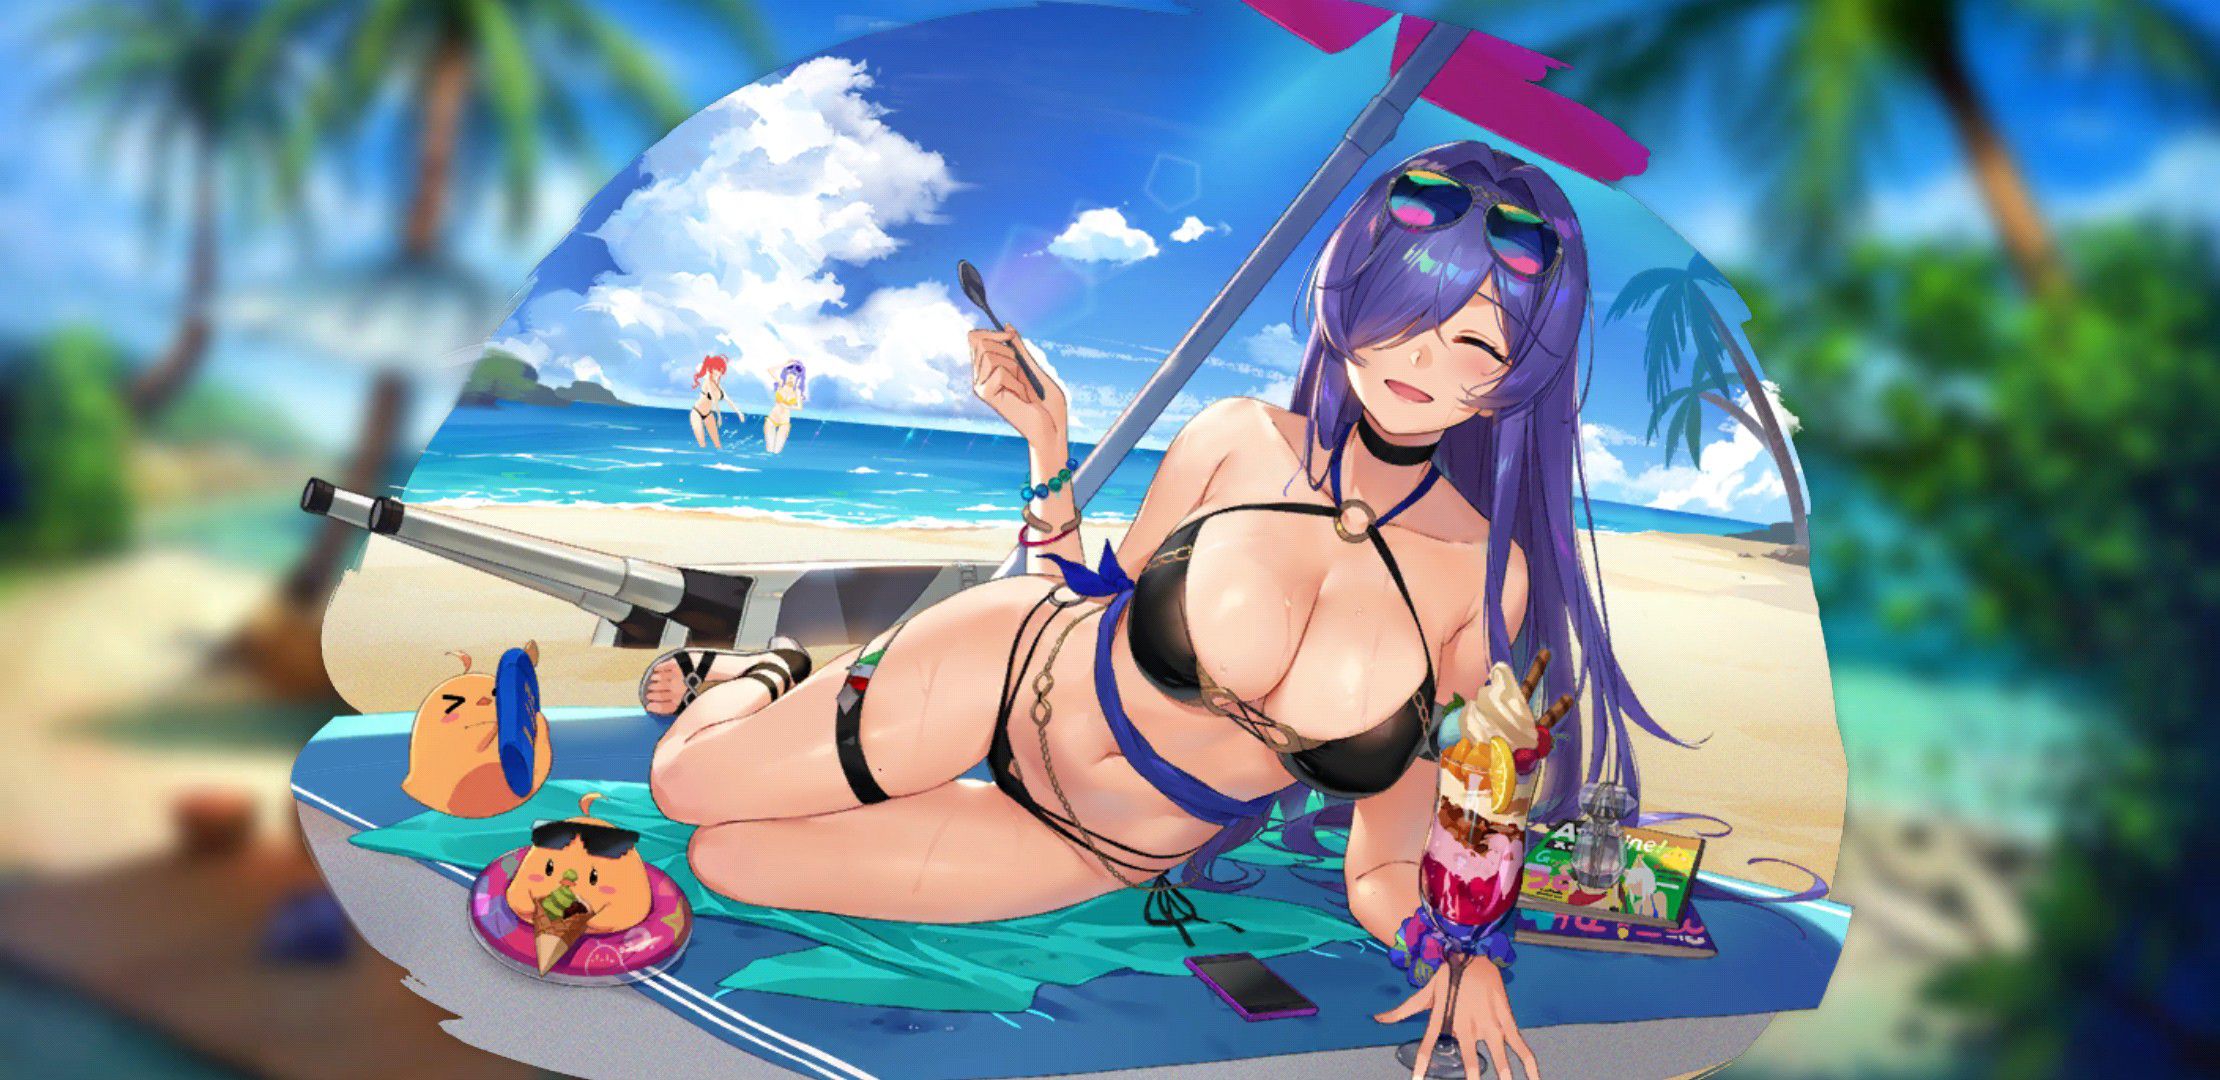 【There is an image】 Smartphone that urges charging with erotic swimsuits is malicious 28